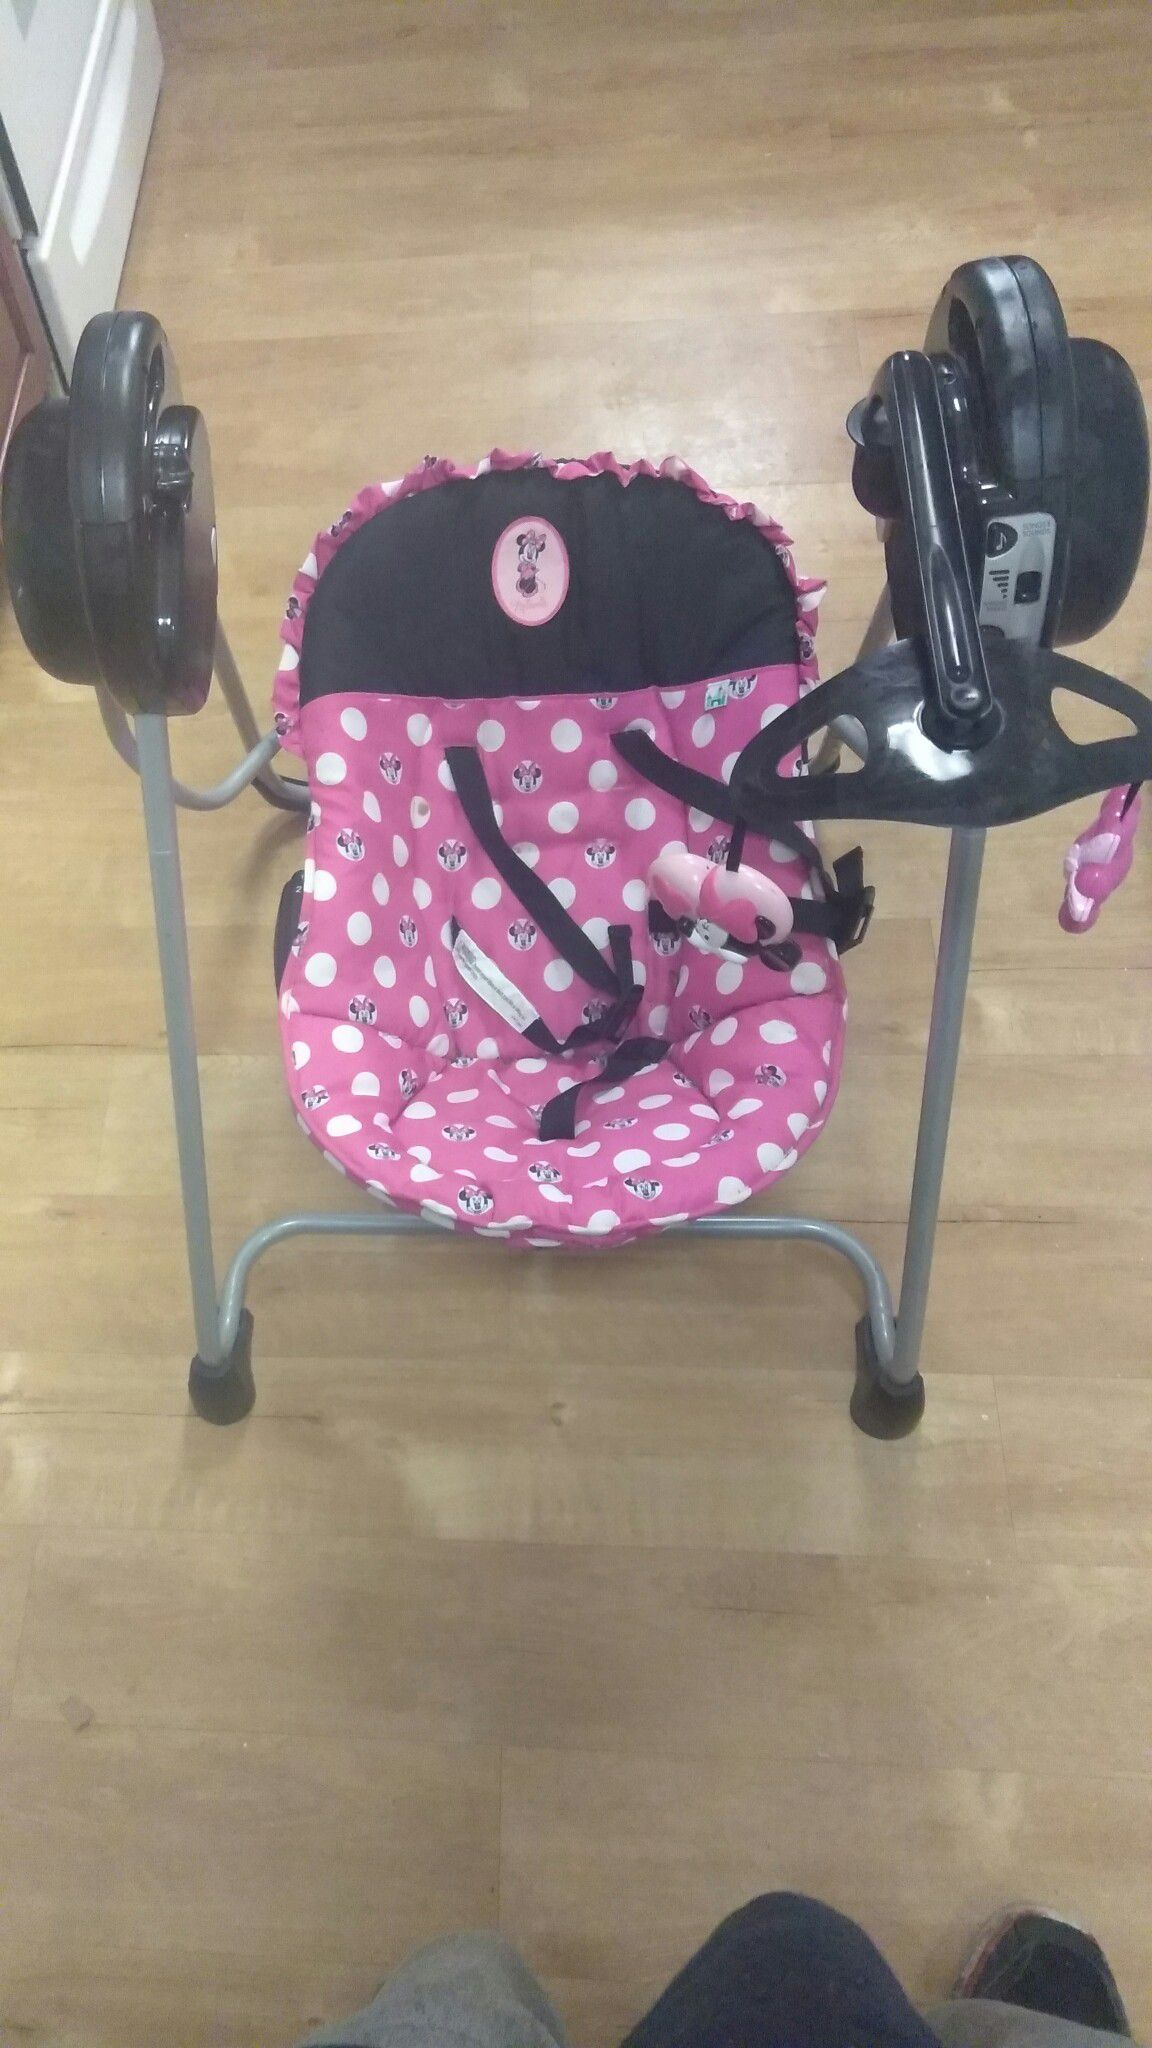 Who was interested in the baby swing ??